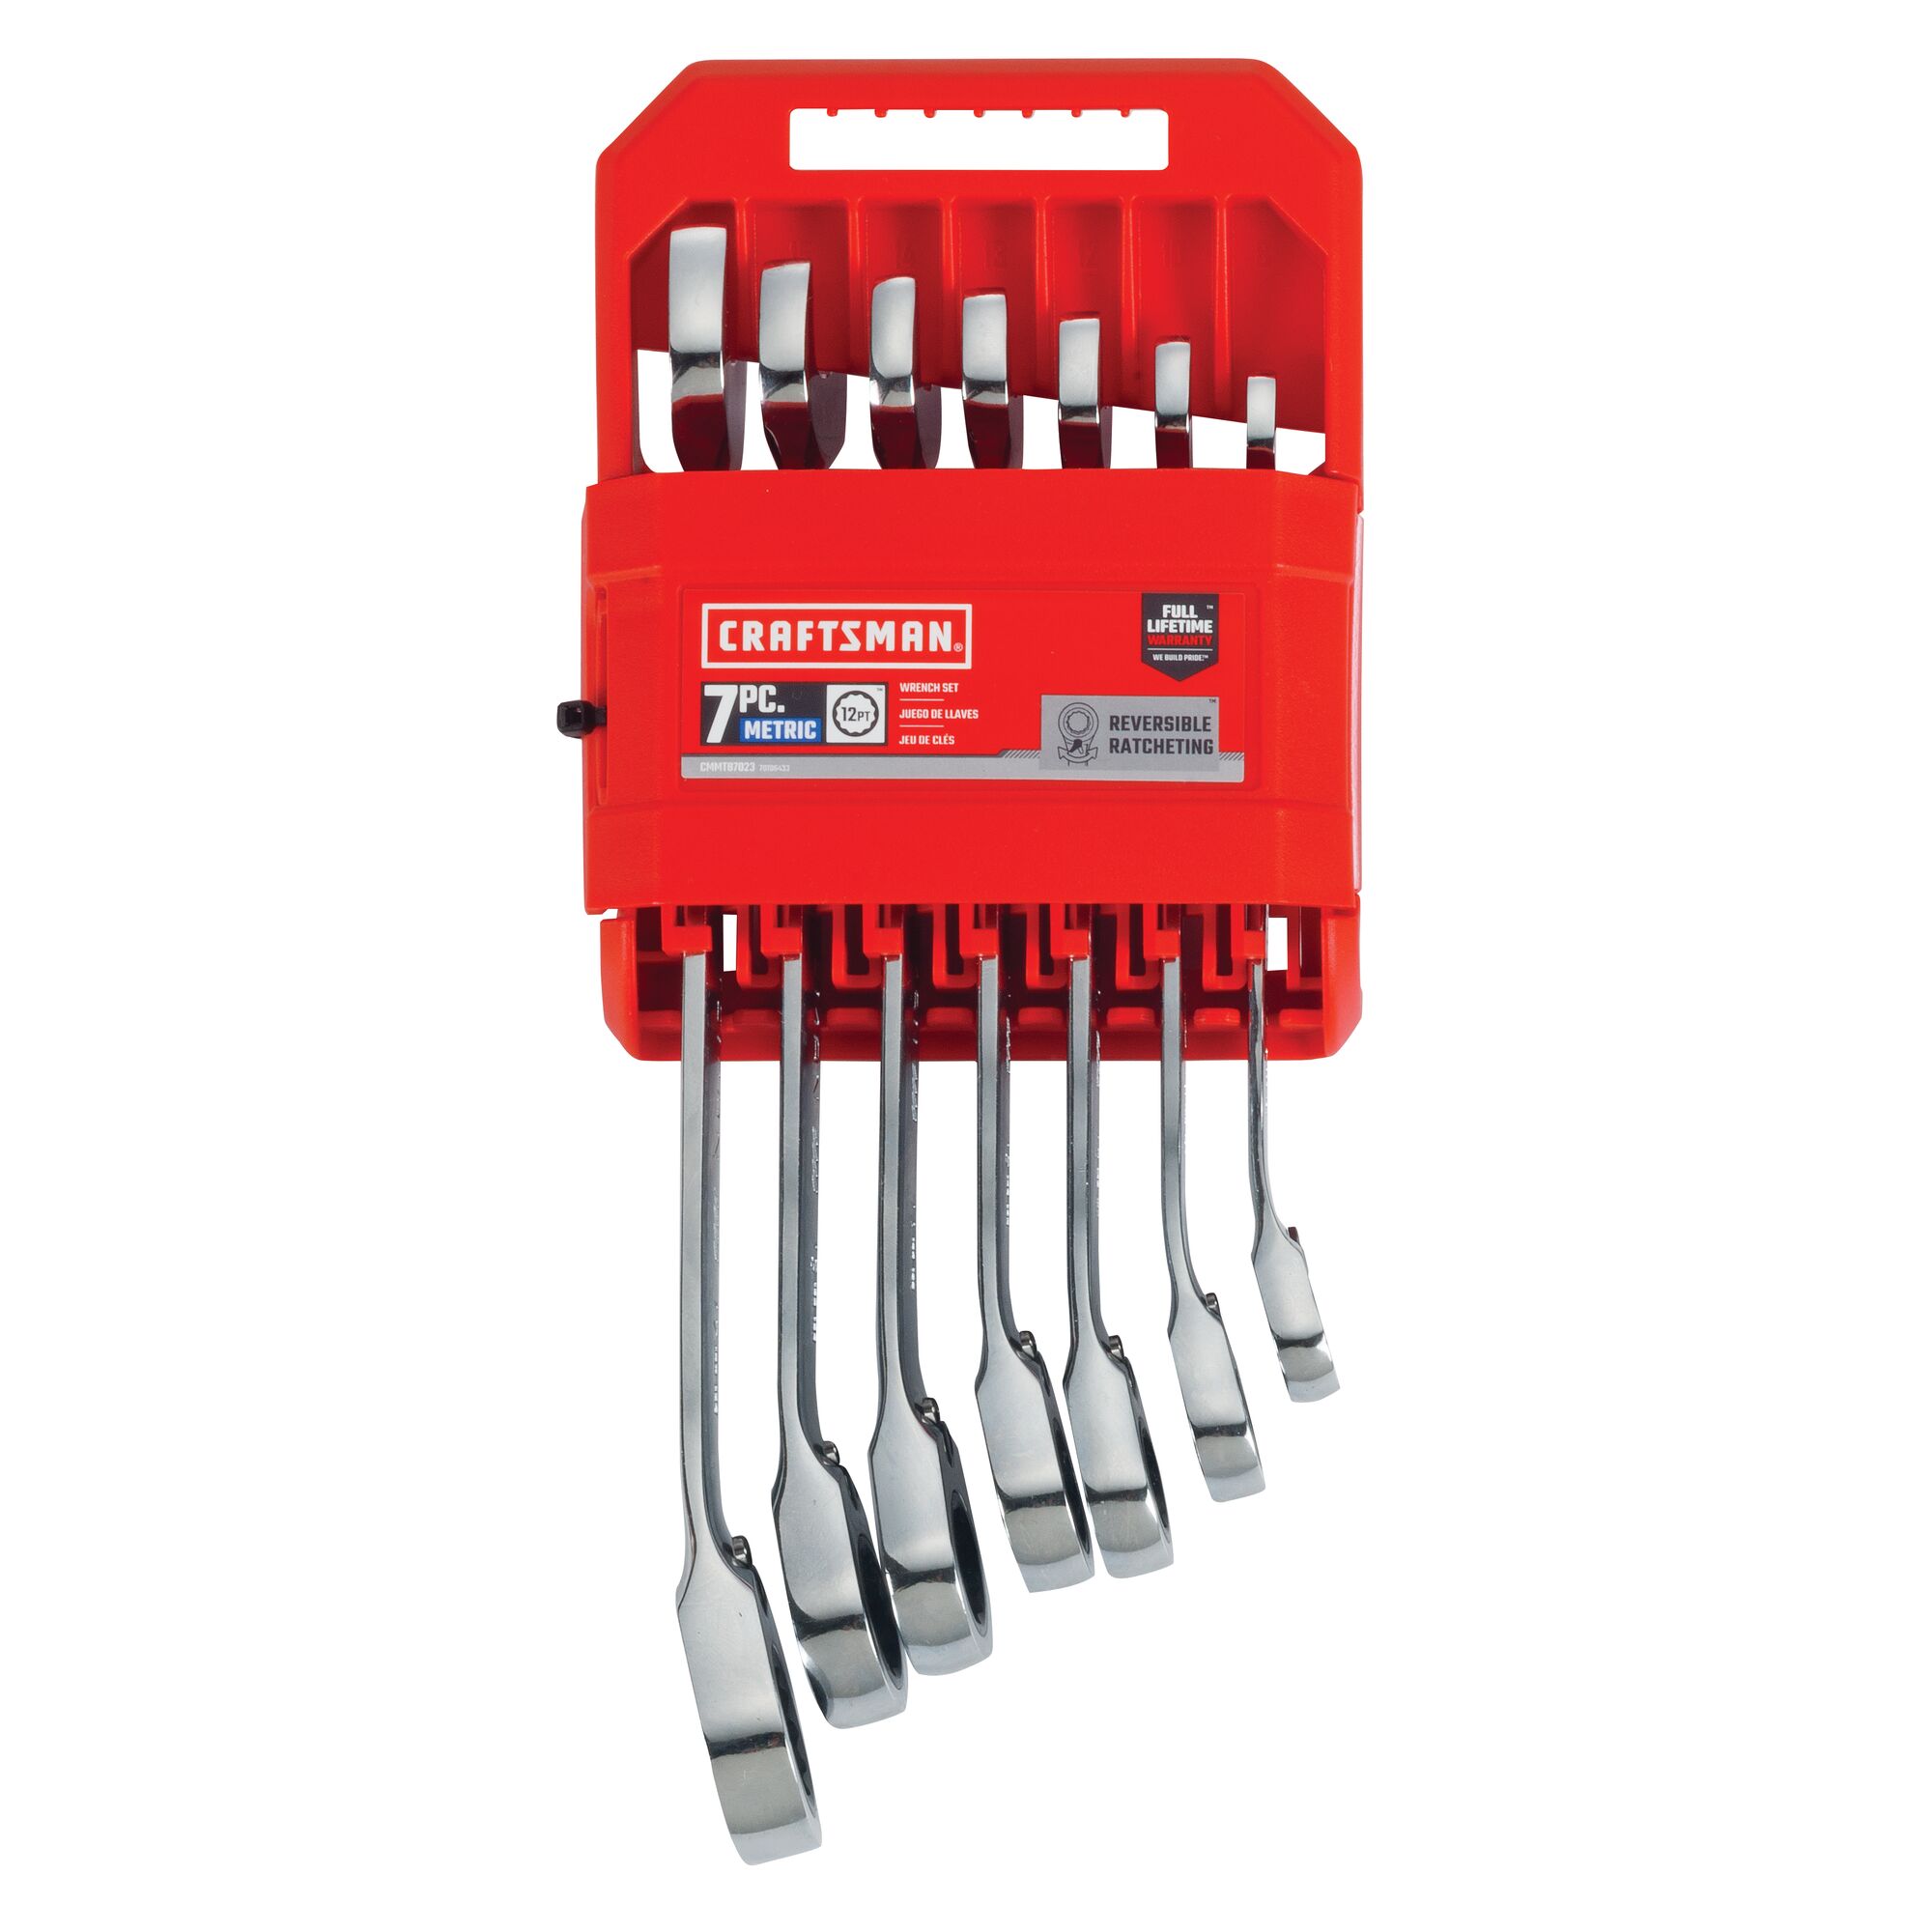 7 piece metric reversible ratcheting wrench set in packaging.